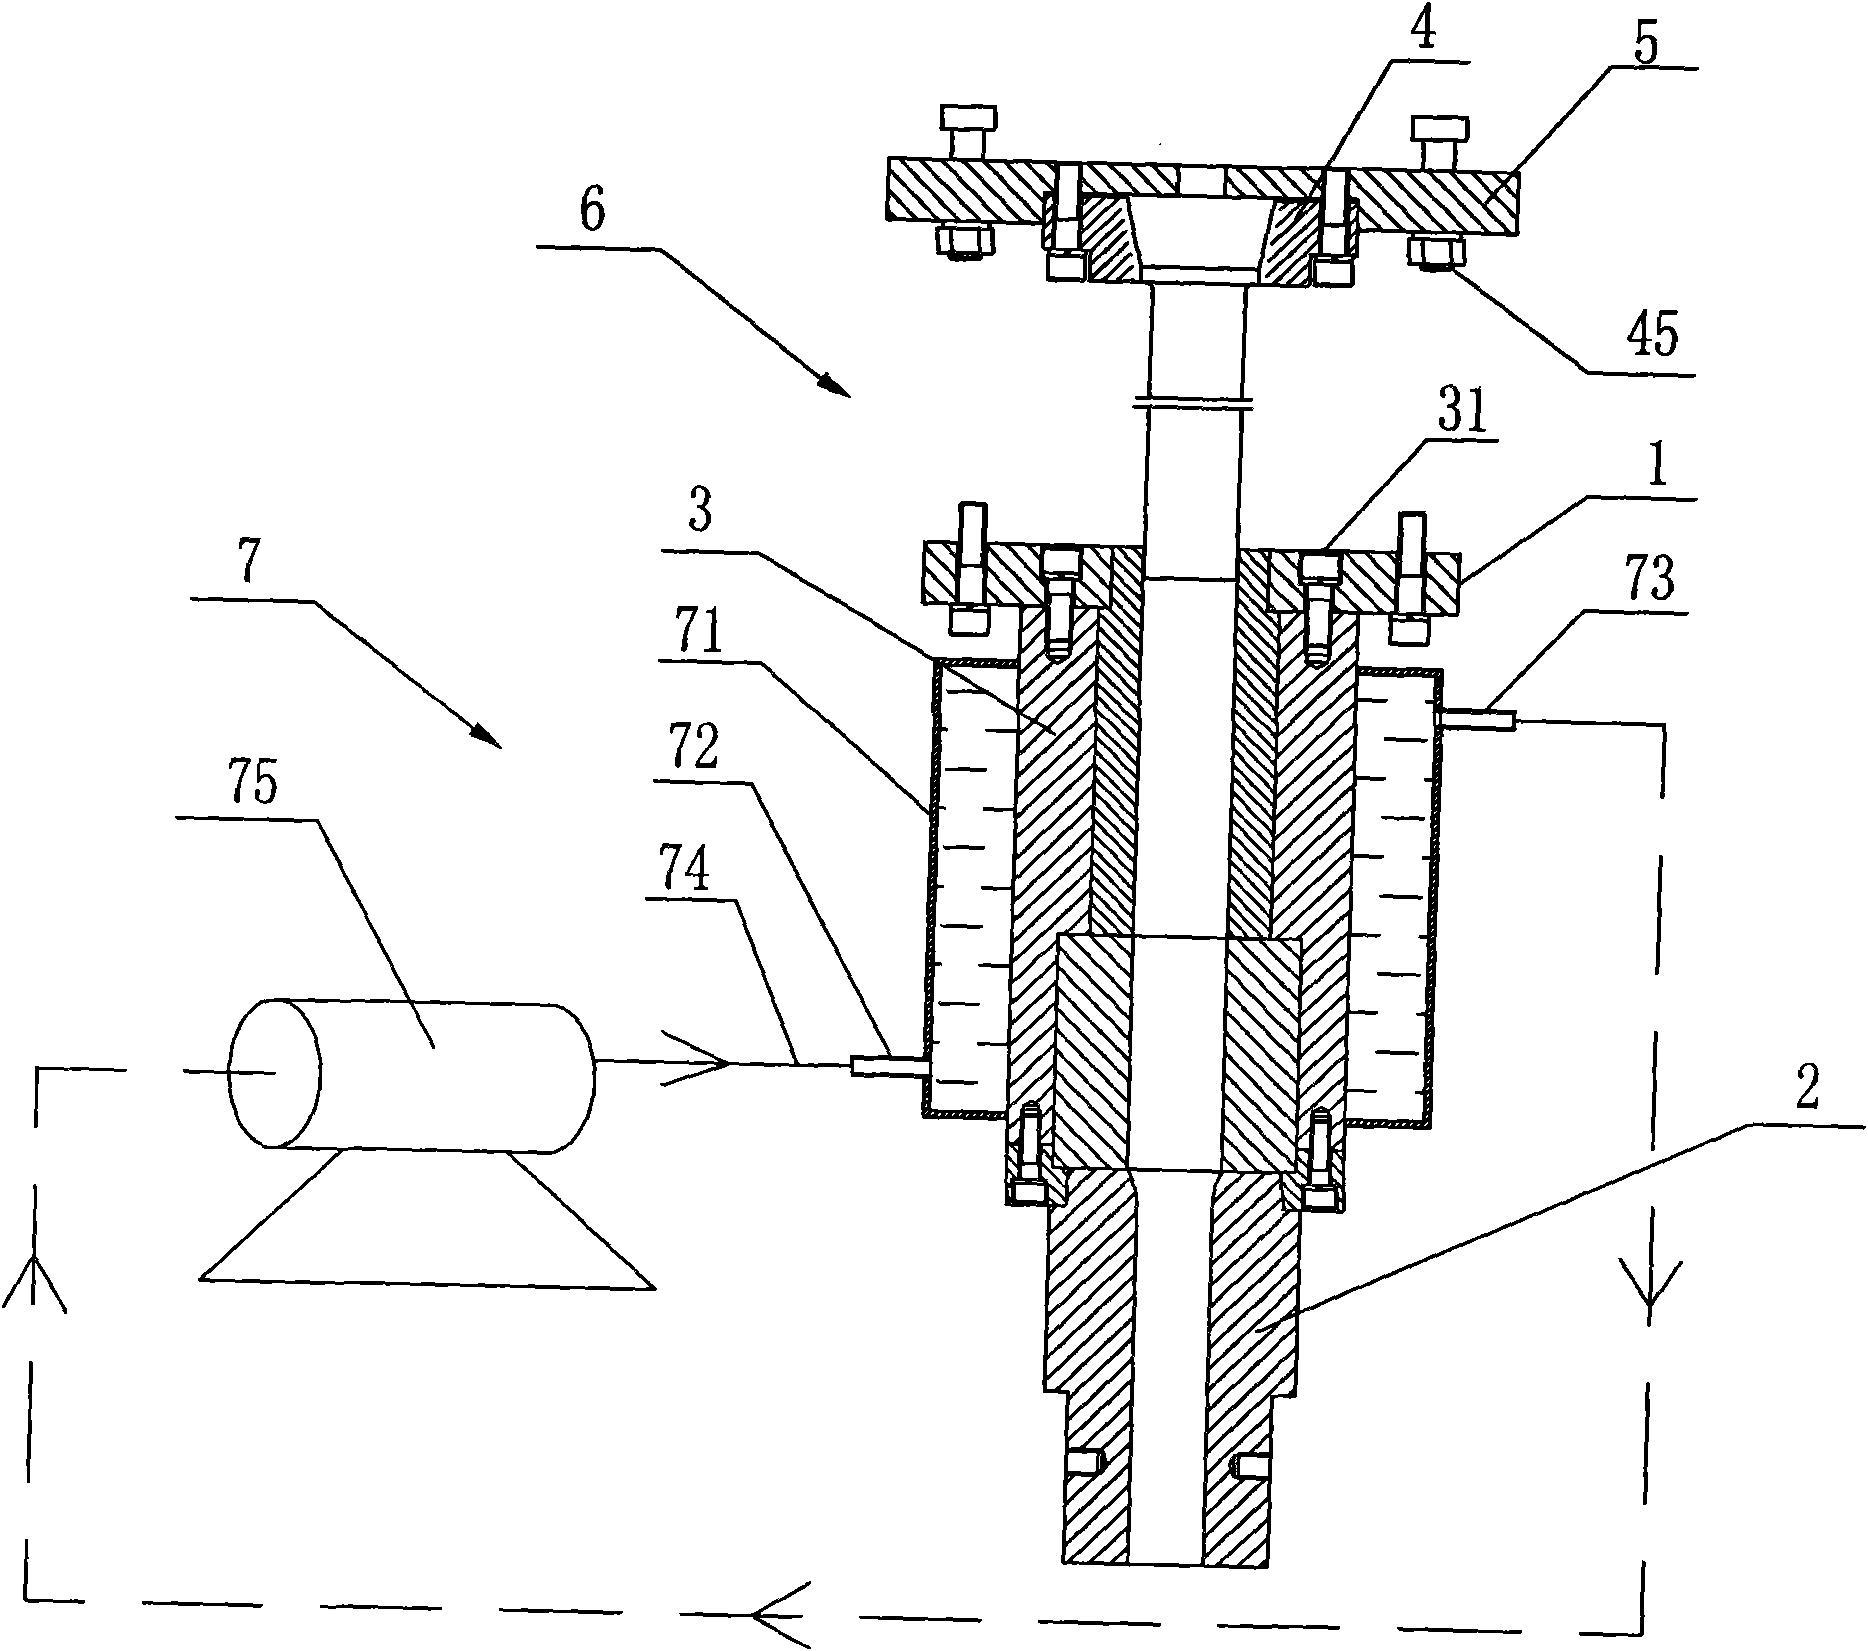 Half-shaft pre-upsetting cooling system